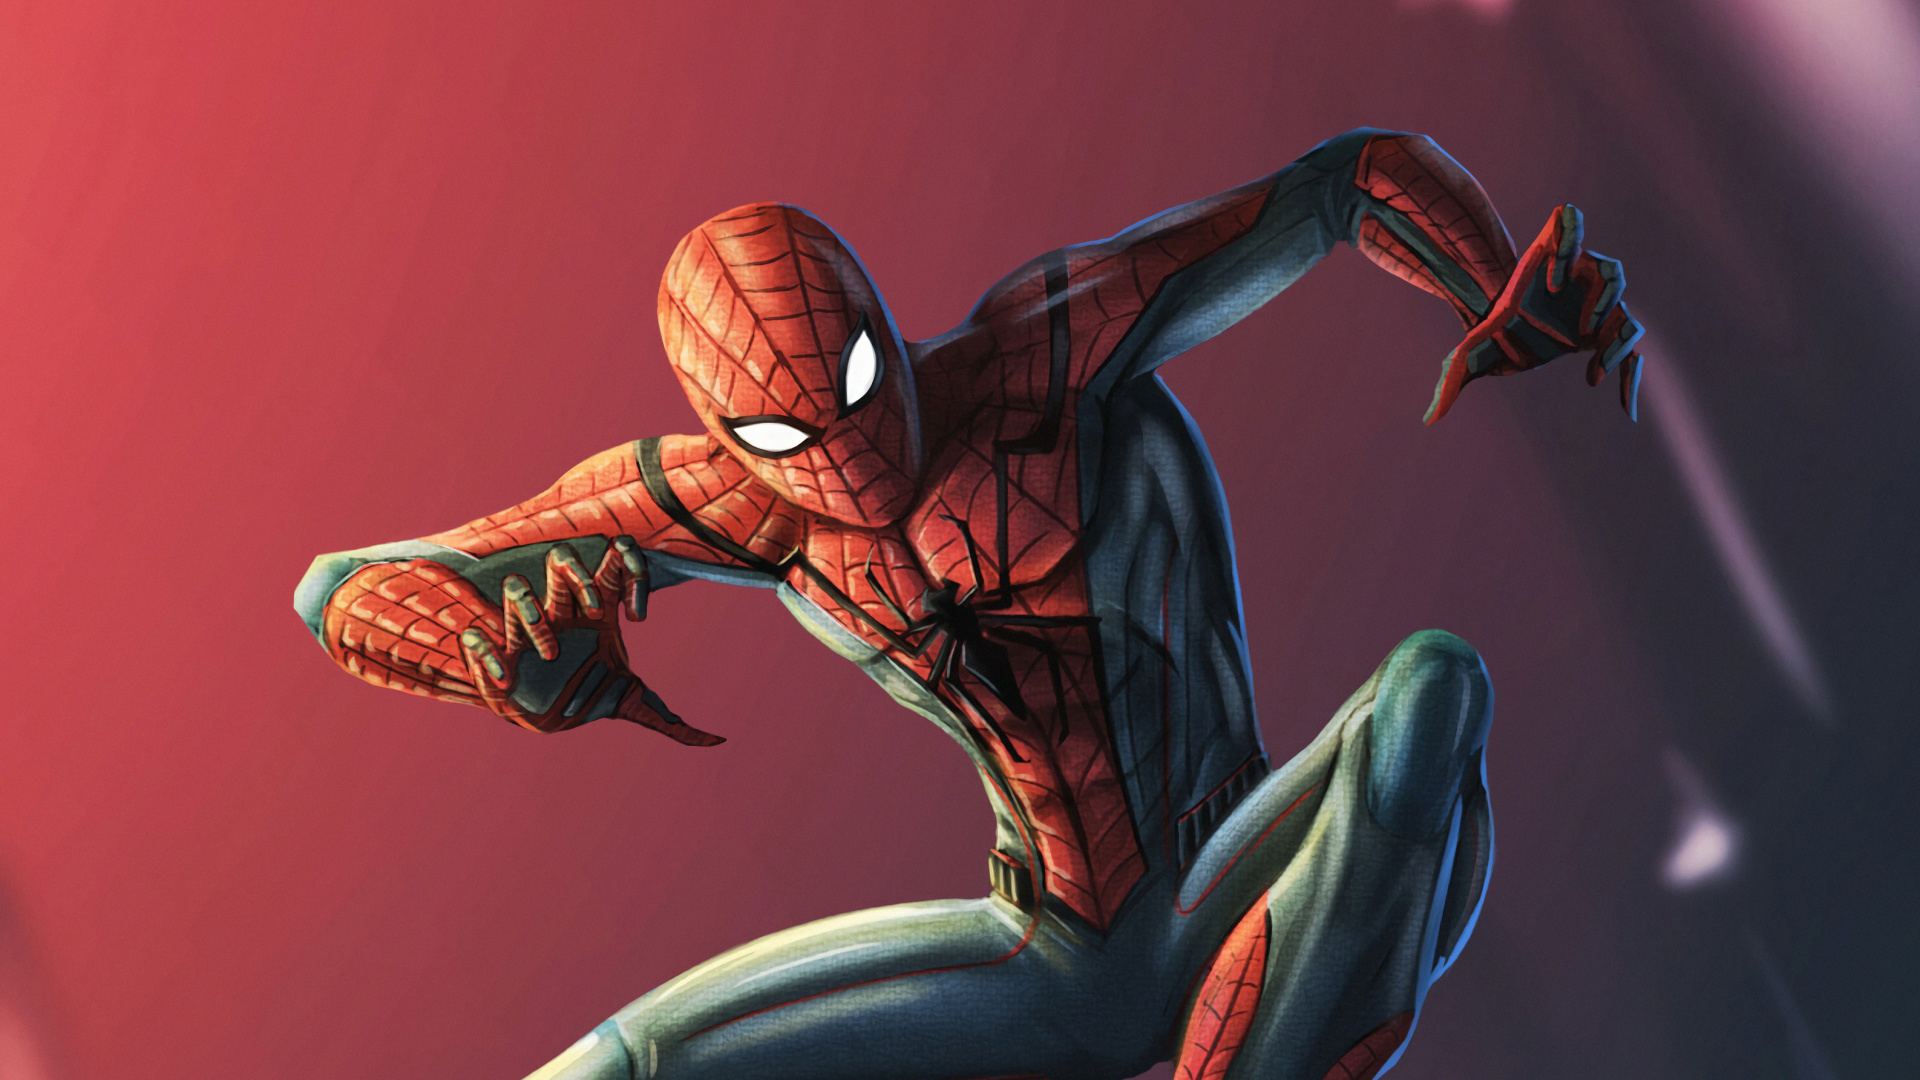 Red and Blue Spider Man Illustration. Wallpaper in 1920x1080 Resolution